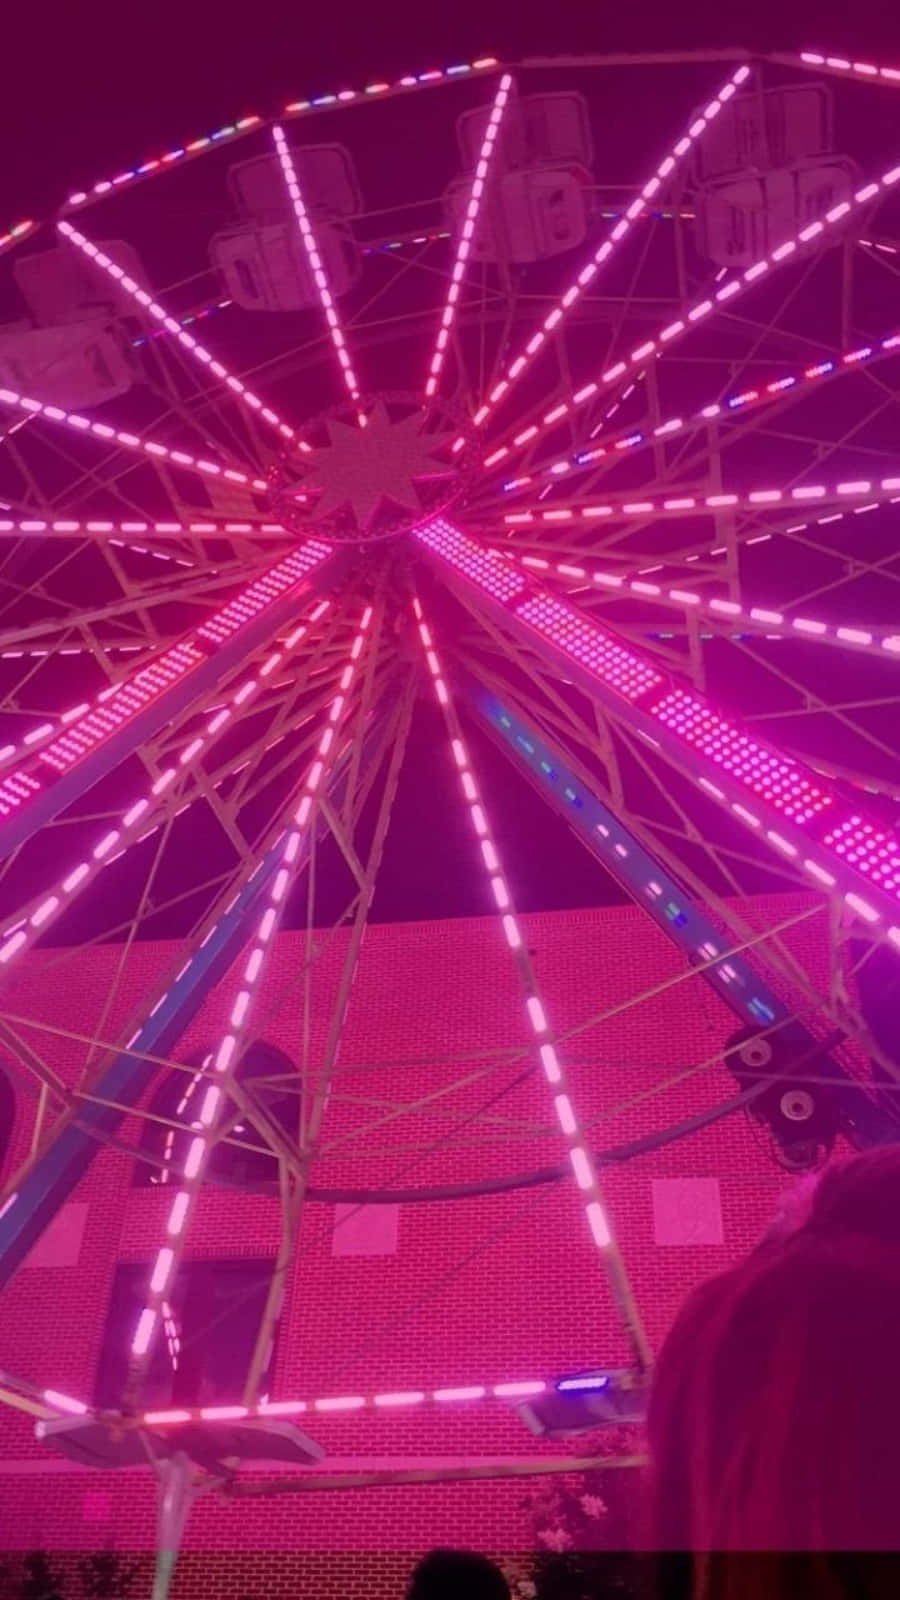 A Ferris Wheel With Lights On It